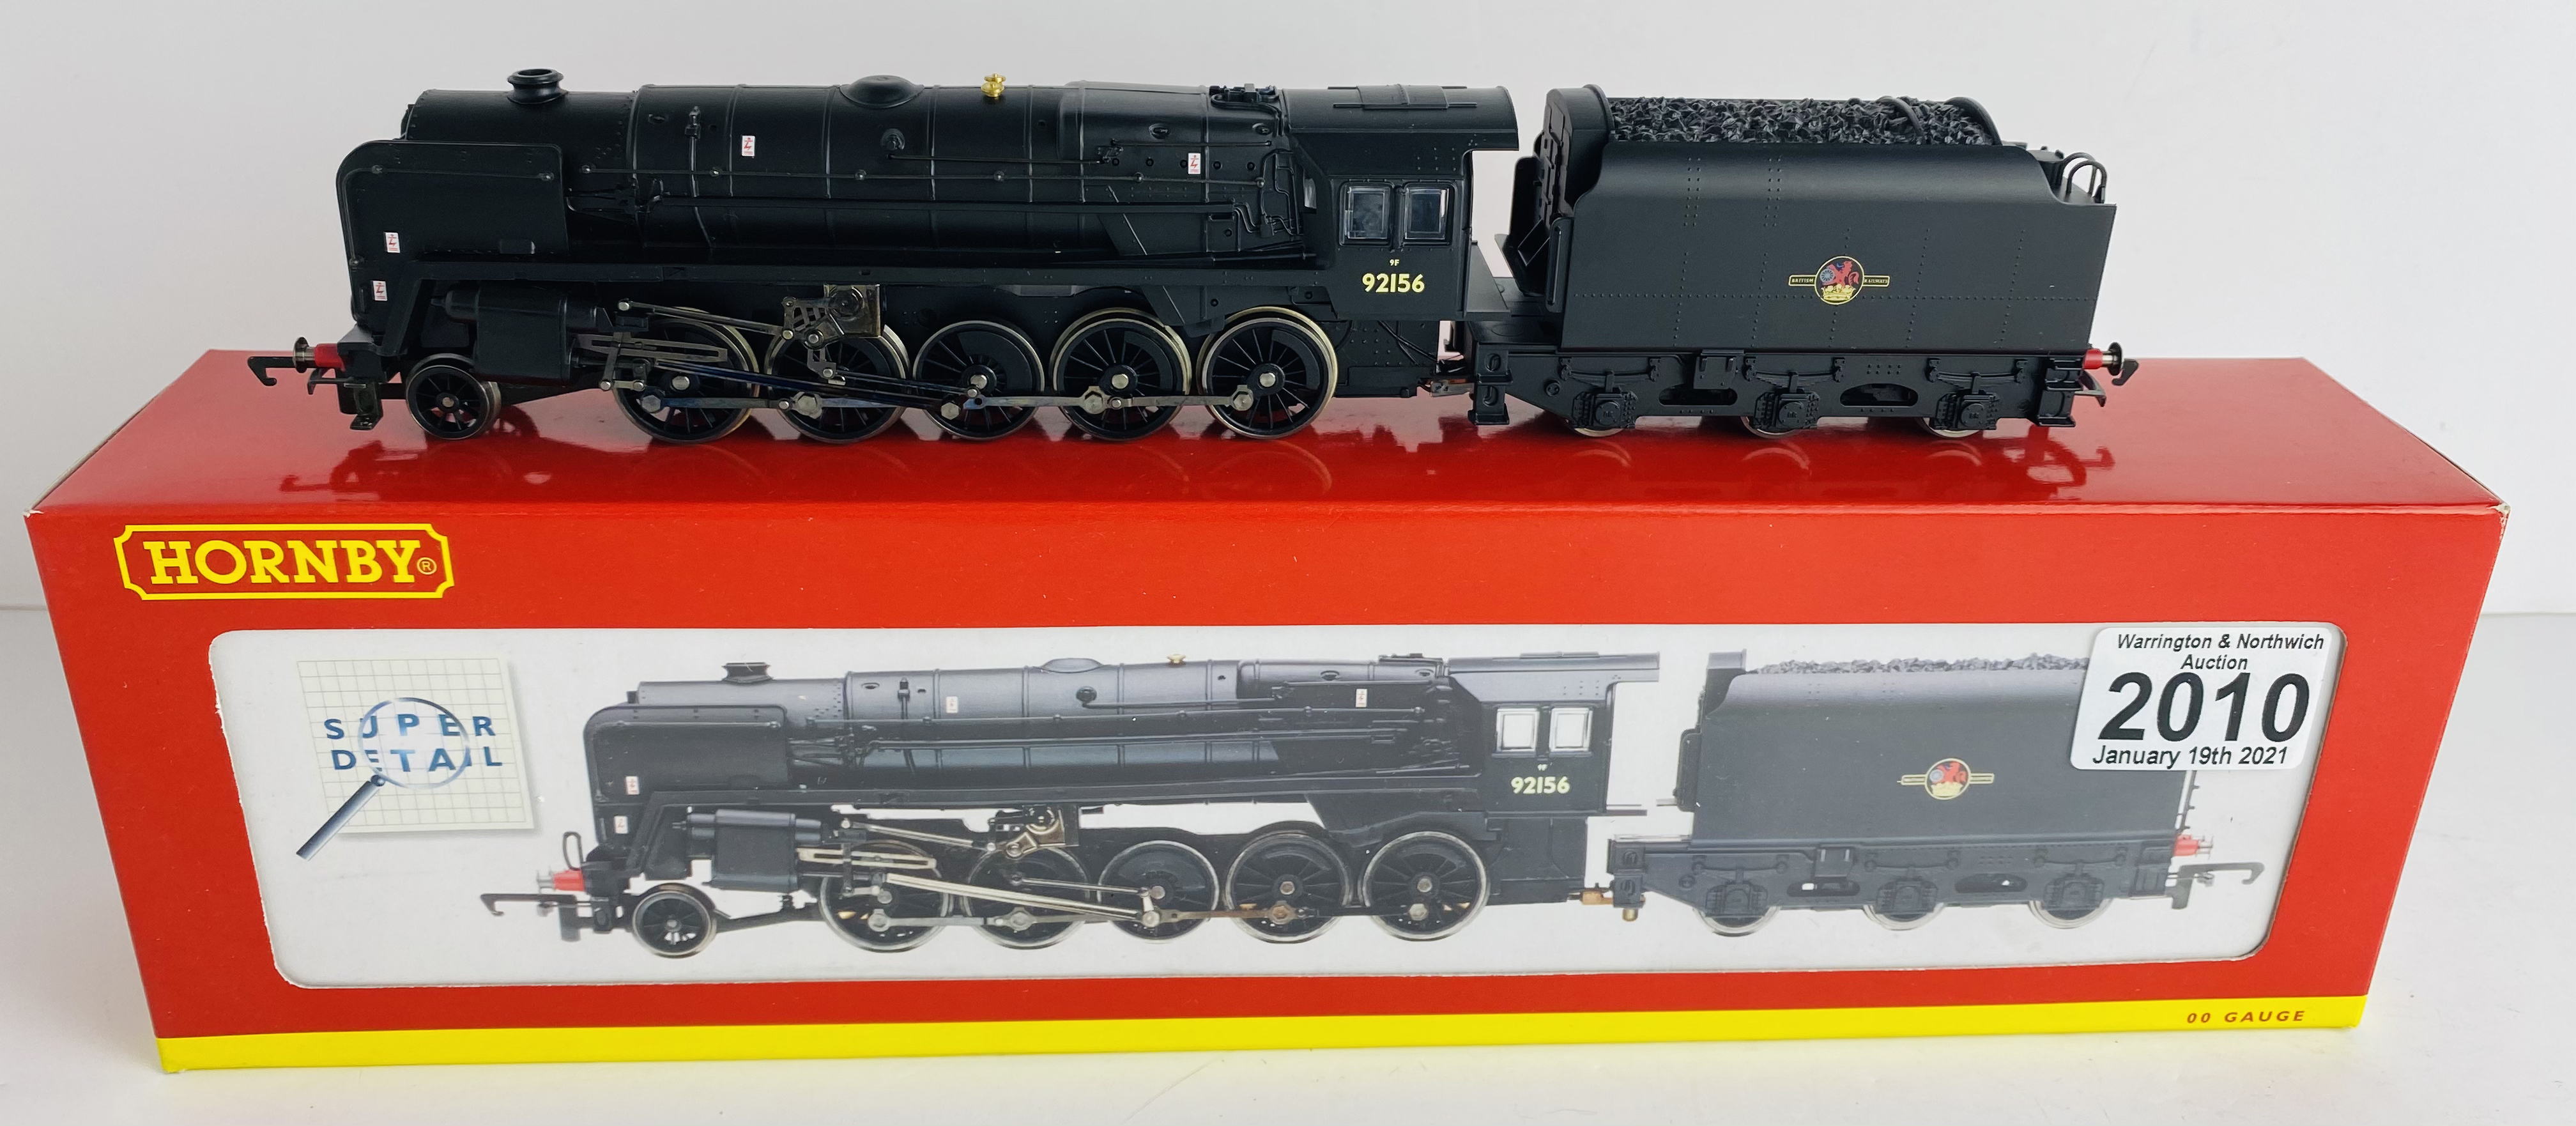 Hornby R2105D OO Gauge BR 9F 92156 Boxed P&P Group 1 (£14+VAT for the first lot and £1+VAT for